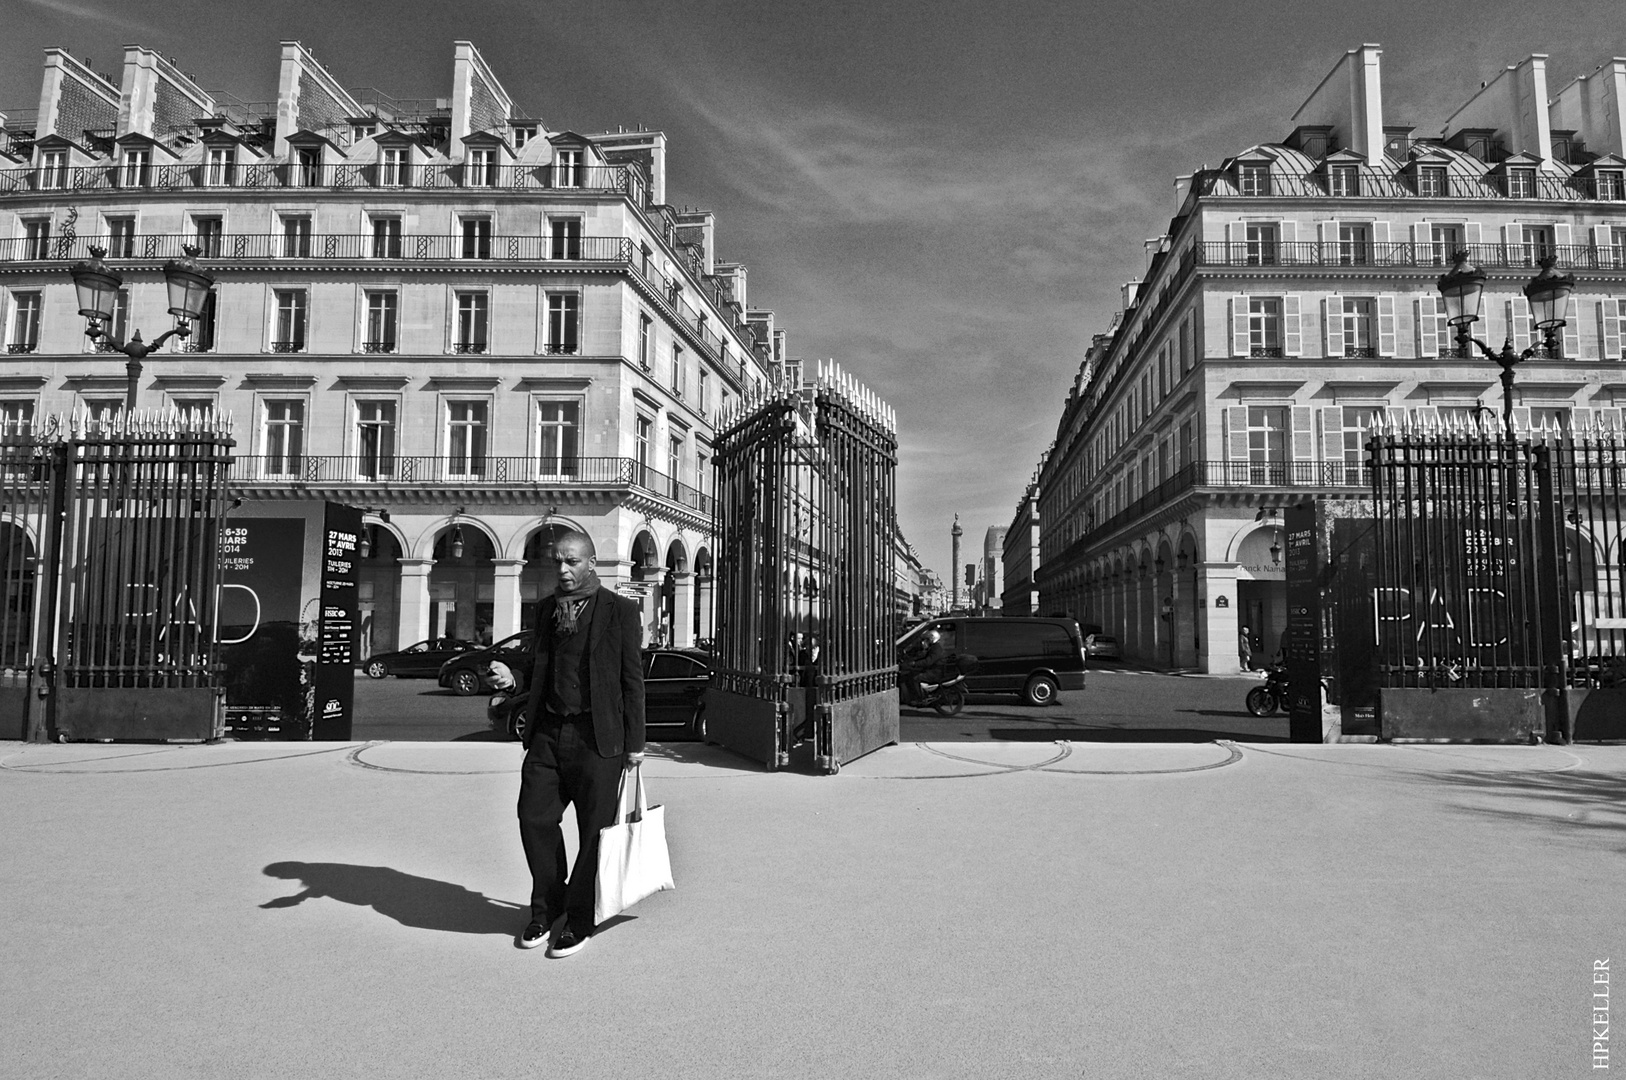 Some month ago in Paris, ...fashionable man enters the Tuileries Garden.